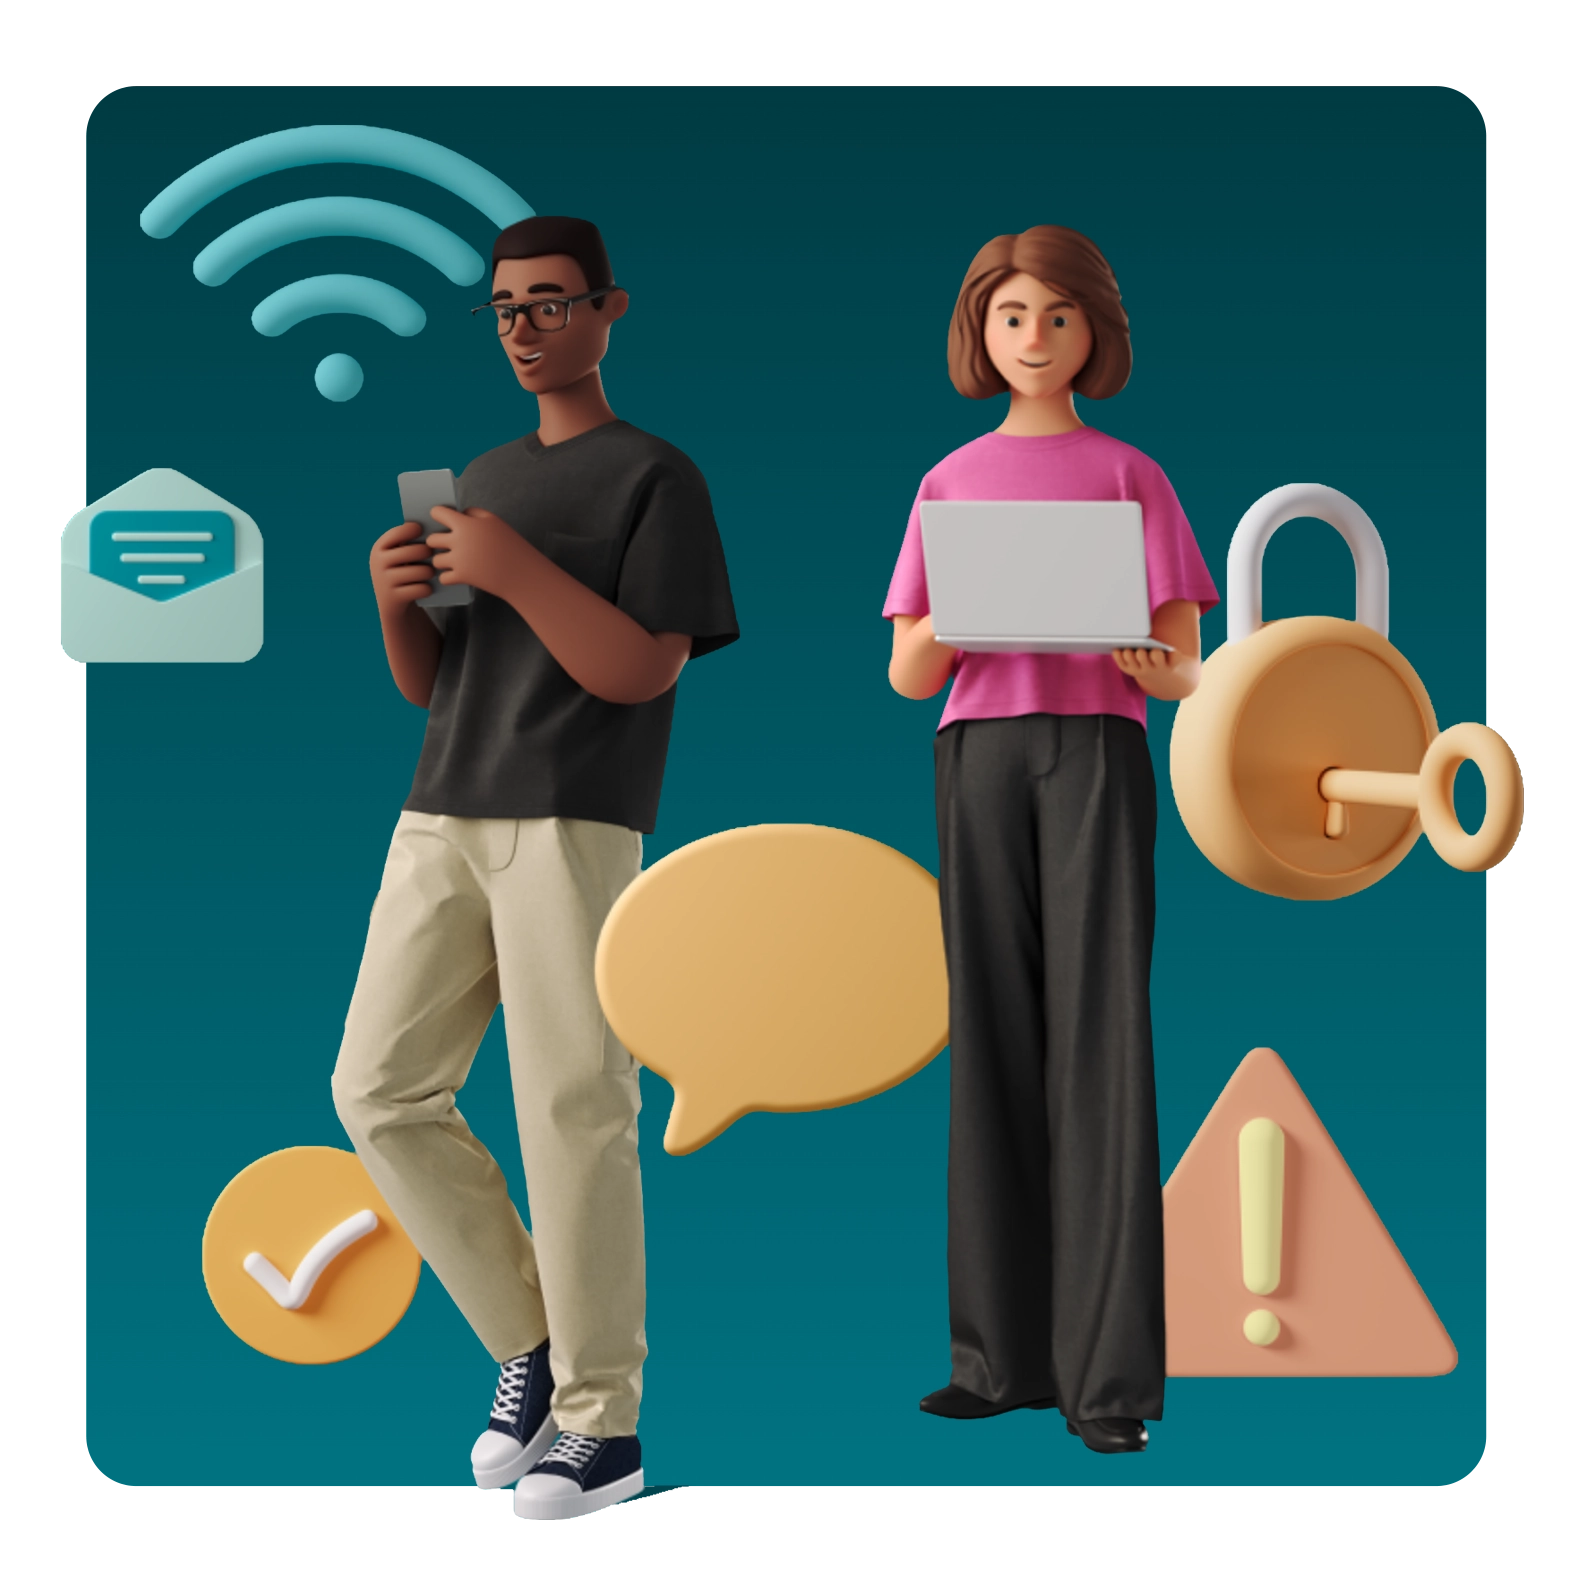 Illustration of a man and woman surrounded by floating icons representing security, including a lock, a wi-fi symbol, and an alert box.